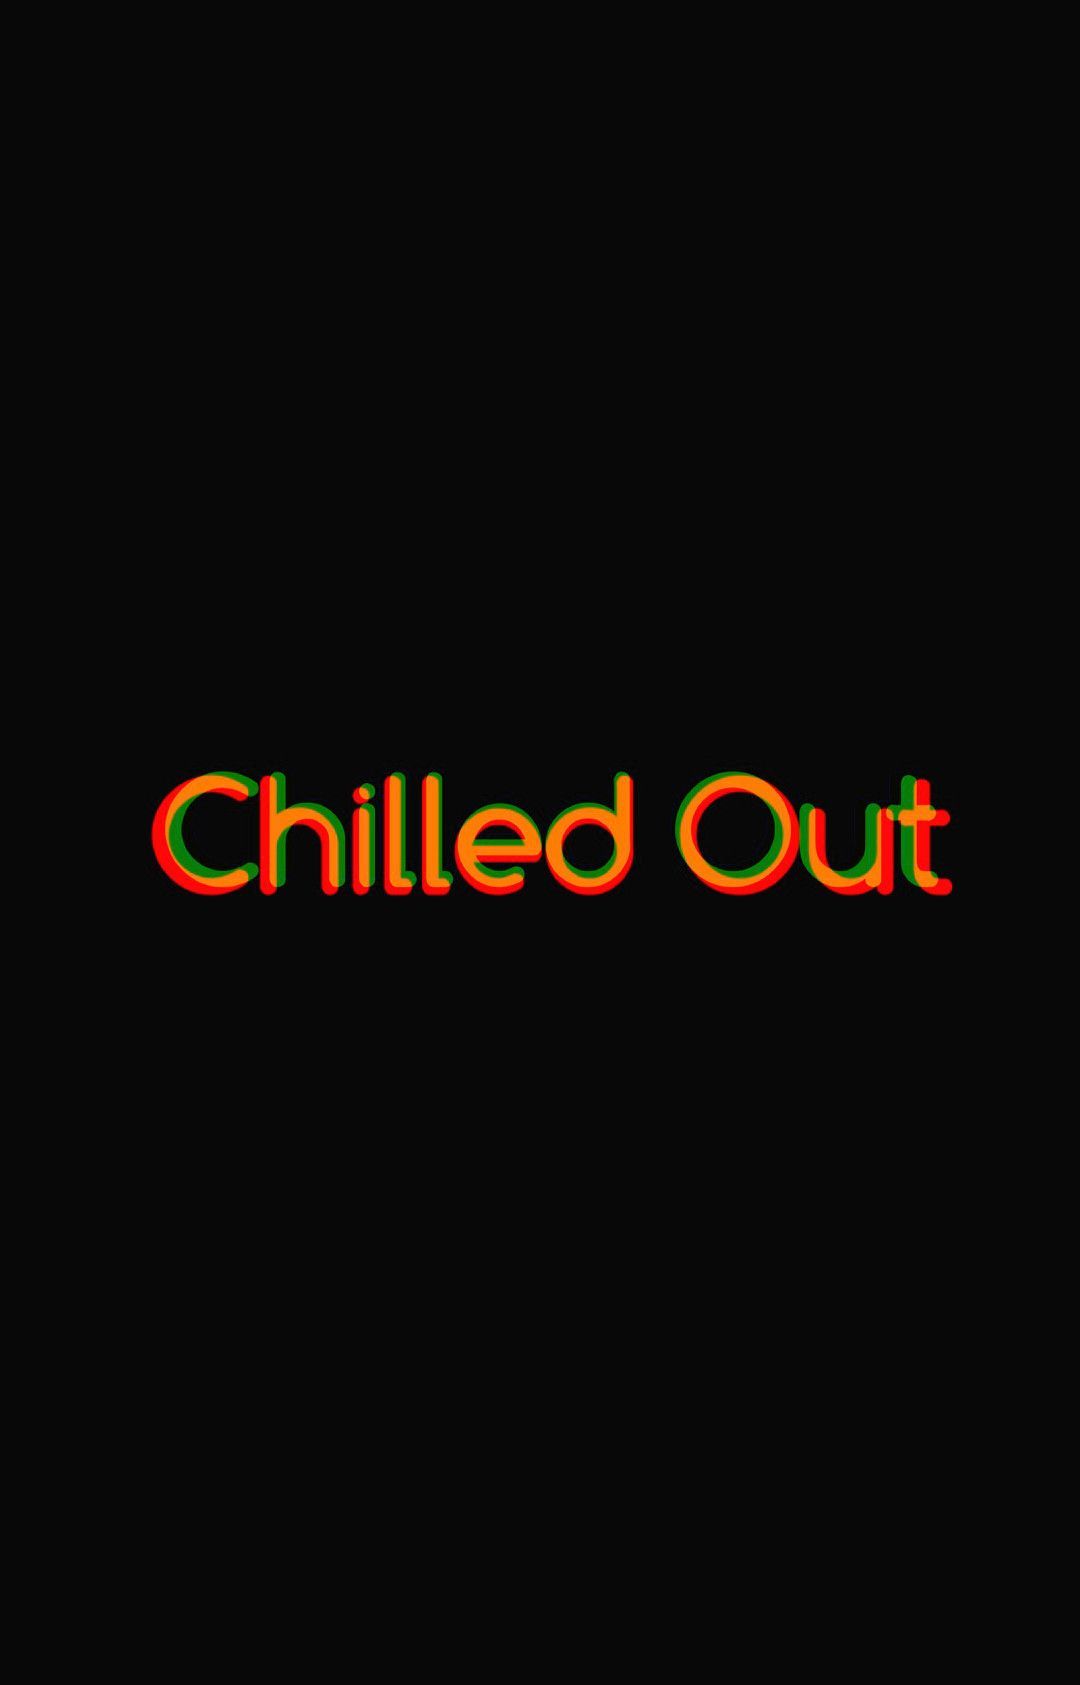 Chill Out Wallpapers on WallpaperDog